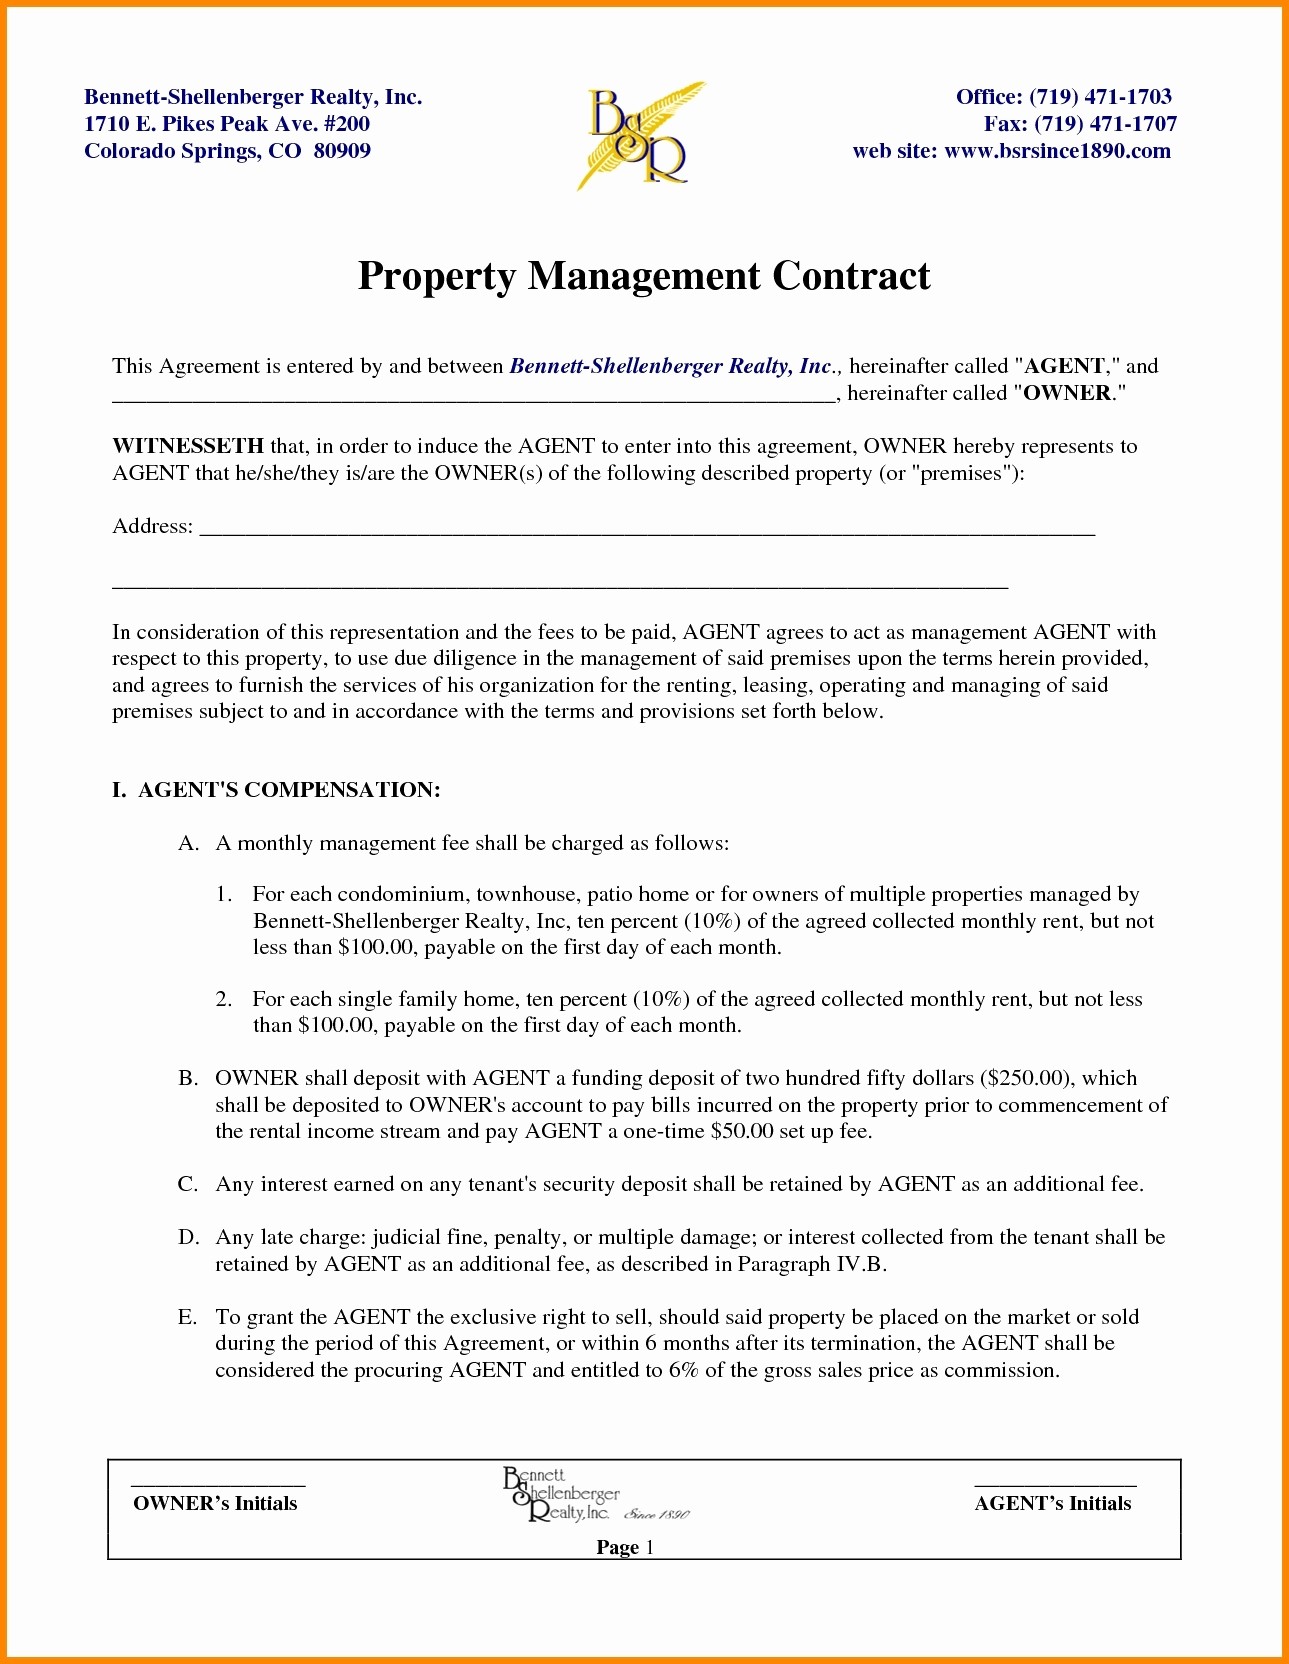 50 Best Of Contract Management Plan Sample DOCUMENTS IDEAS Document